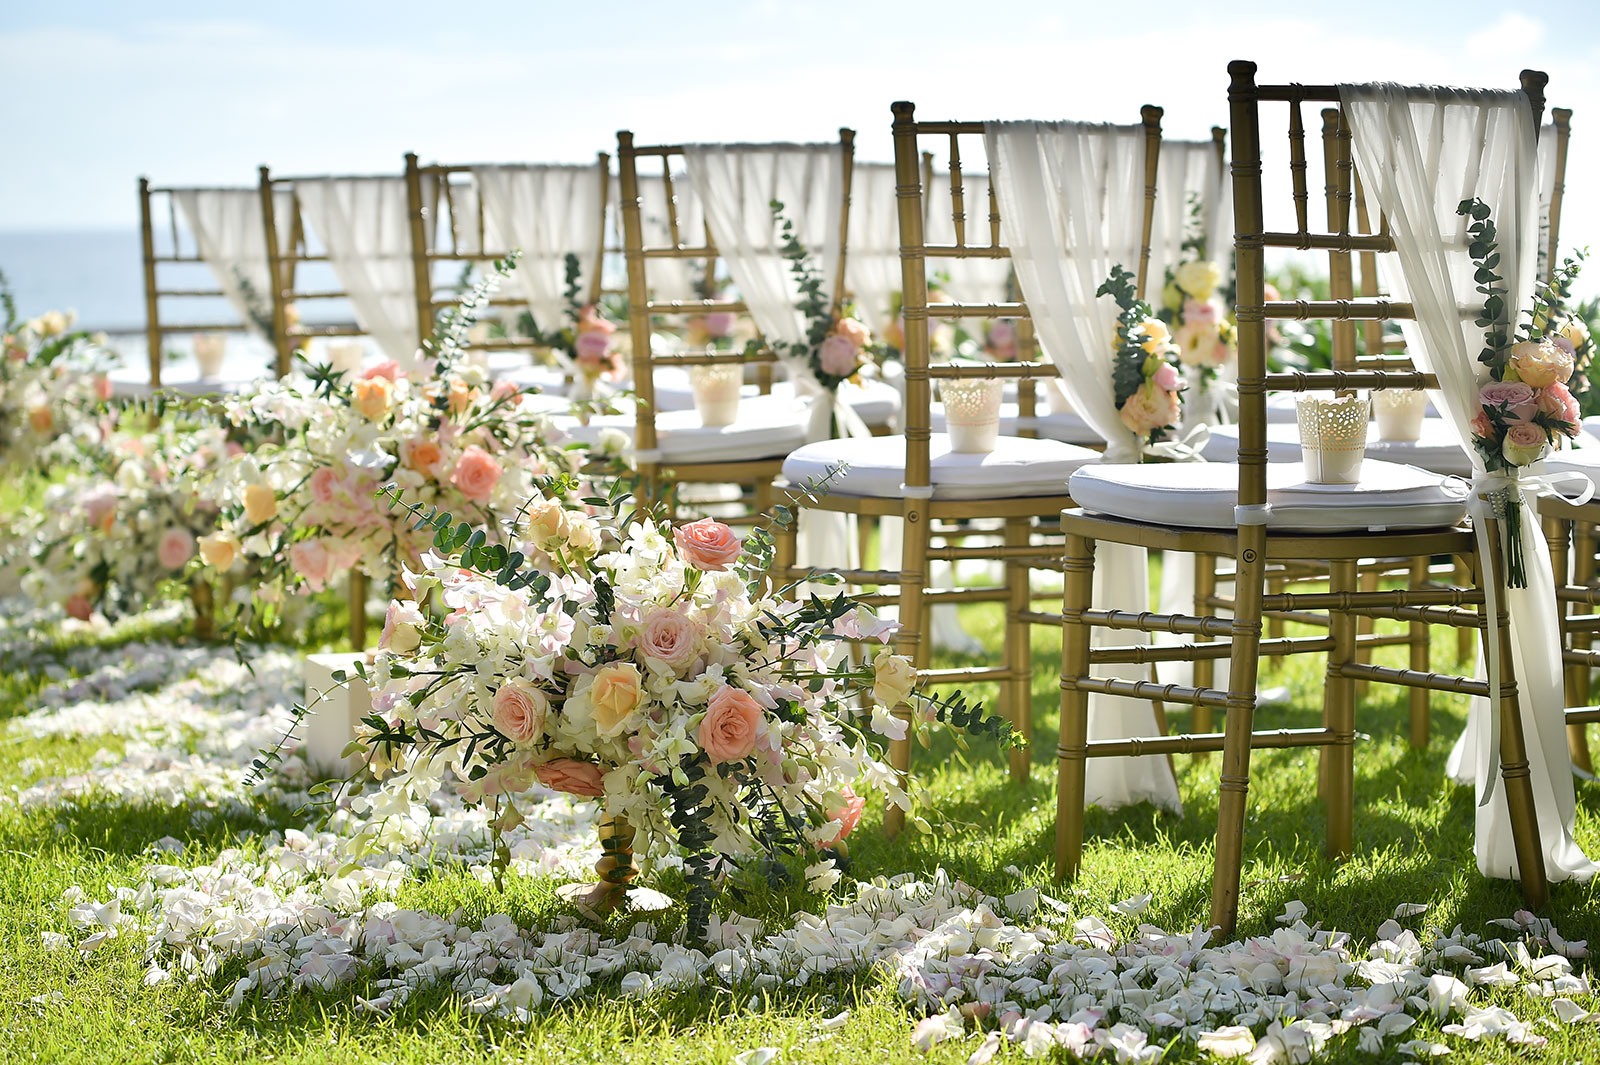 Wedding set up with chairs decorated with flowers and petals